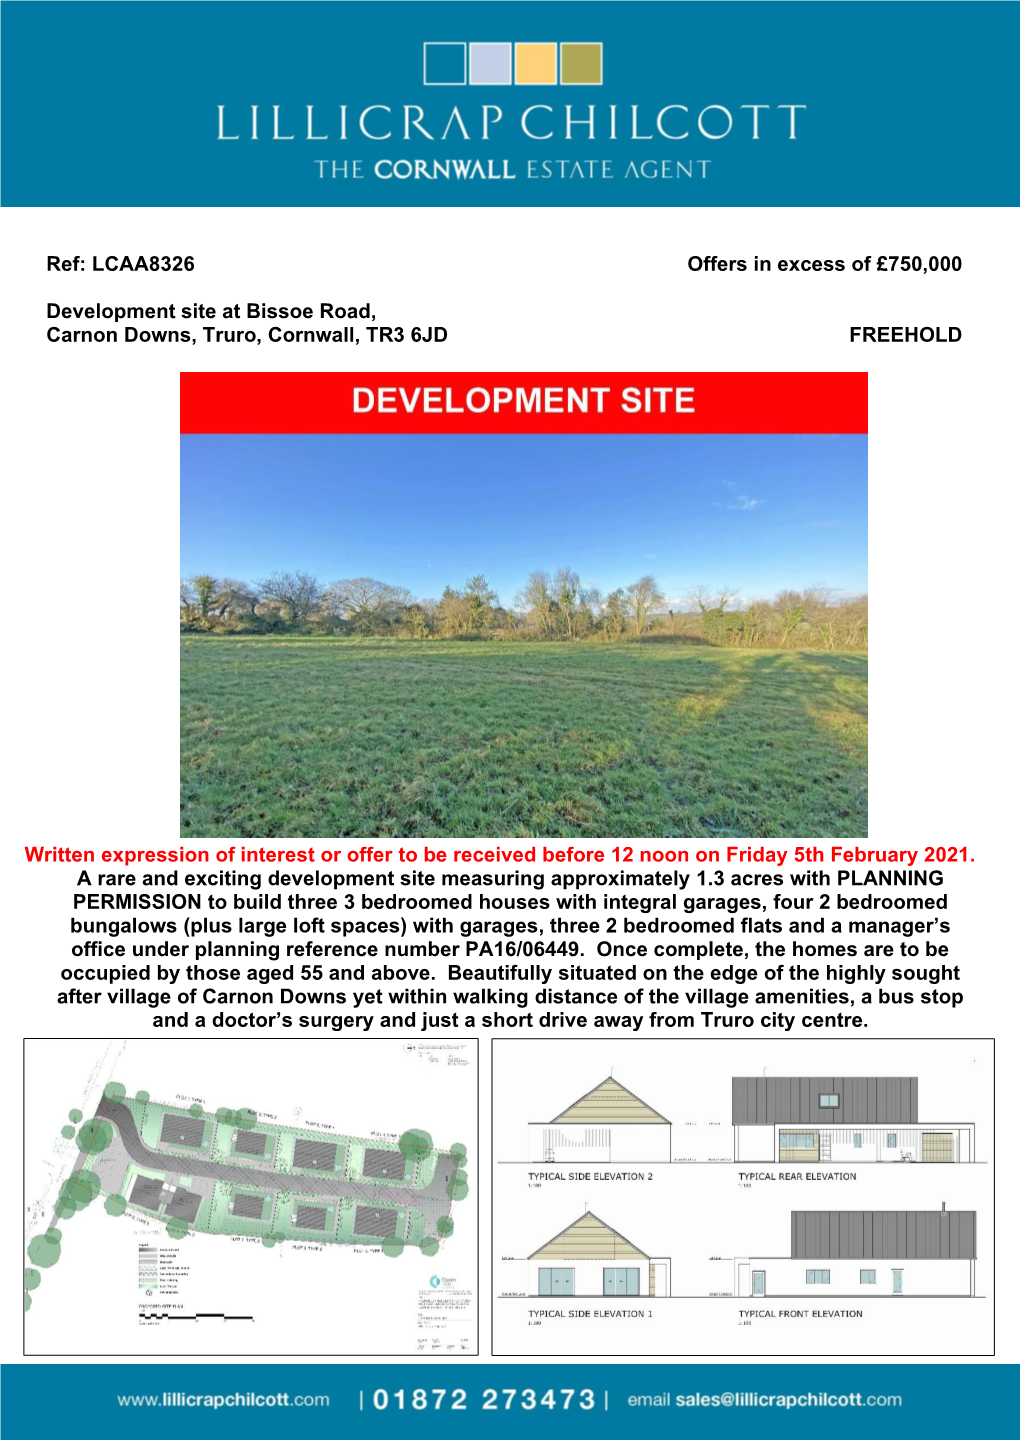 LCAA8326 Offers in Excess of £750000 Development Site At